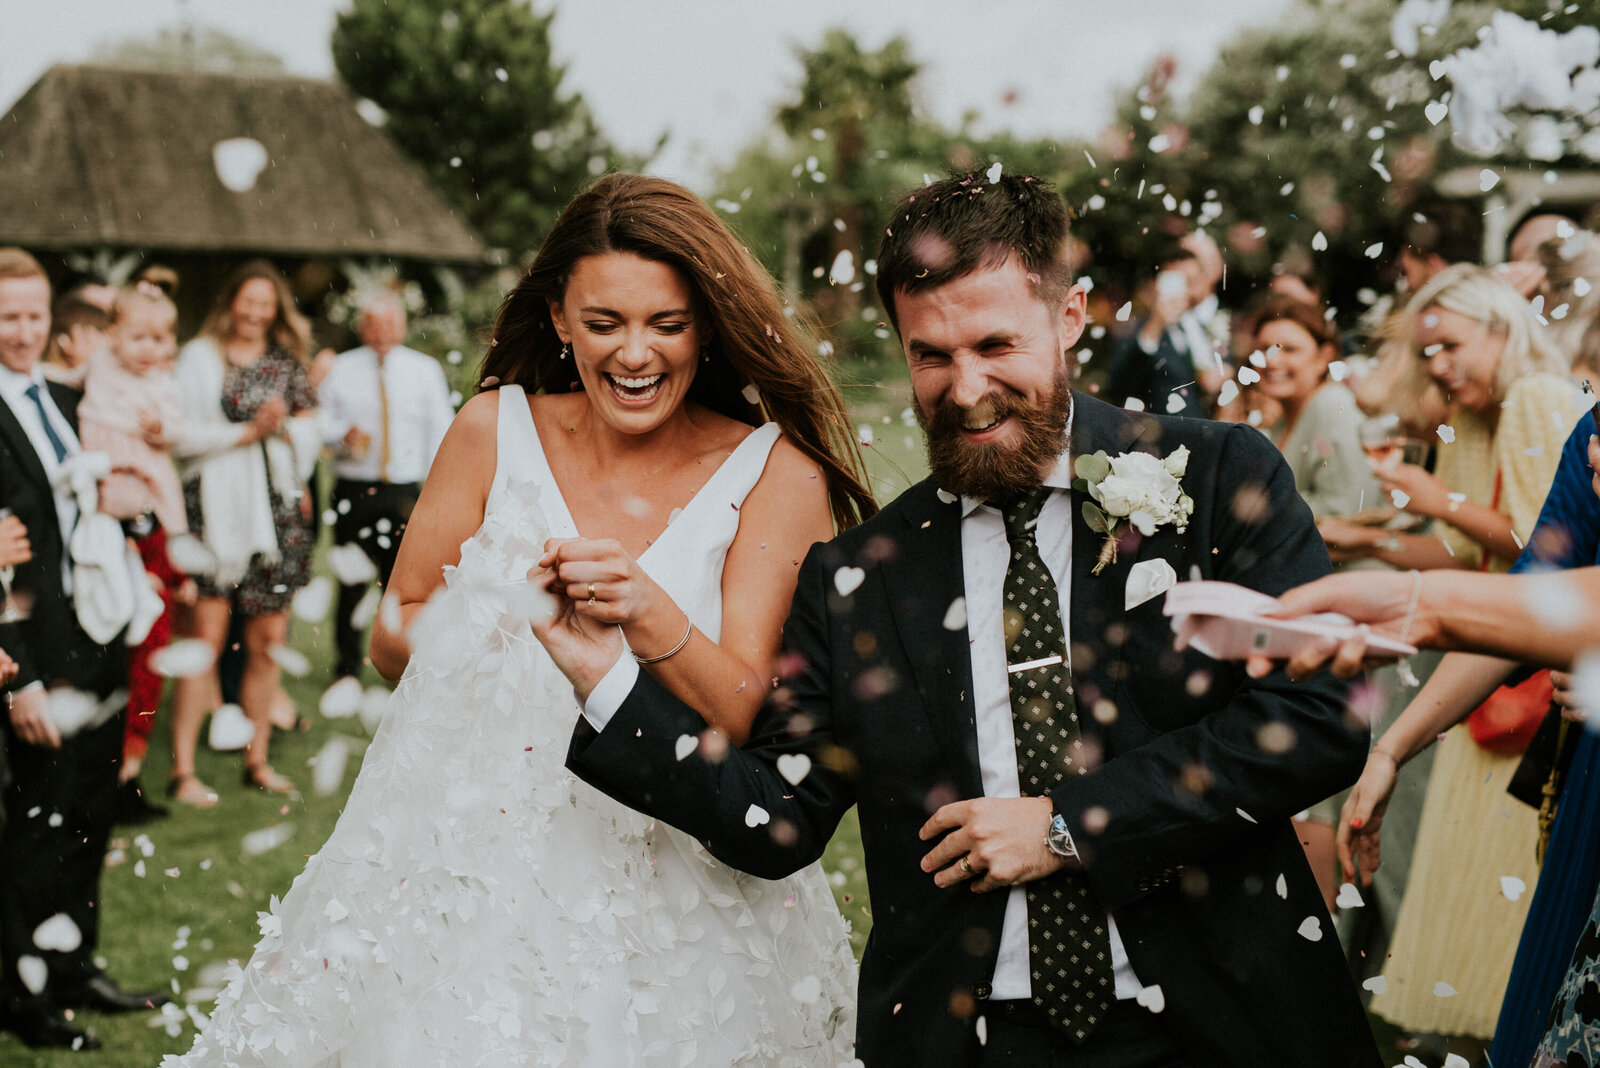 Bride and groom running and laughing as guests throw confetti